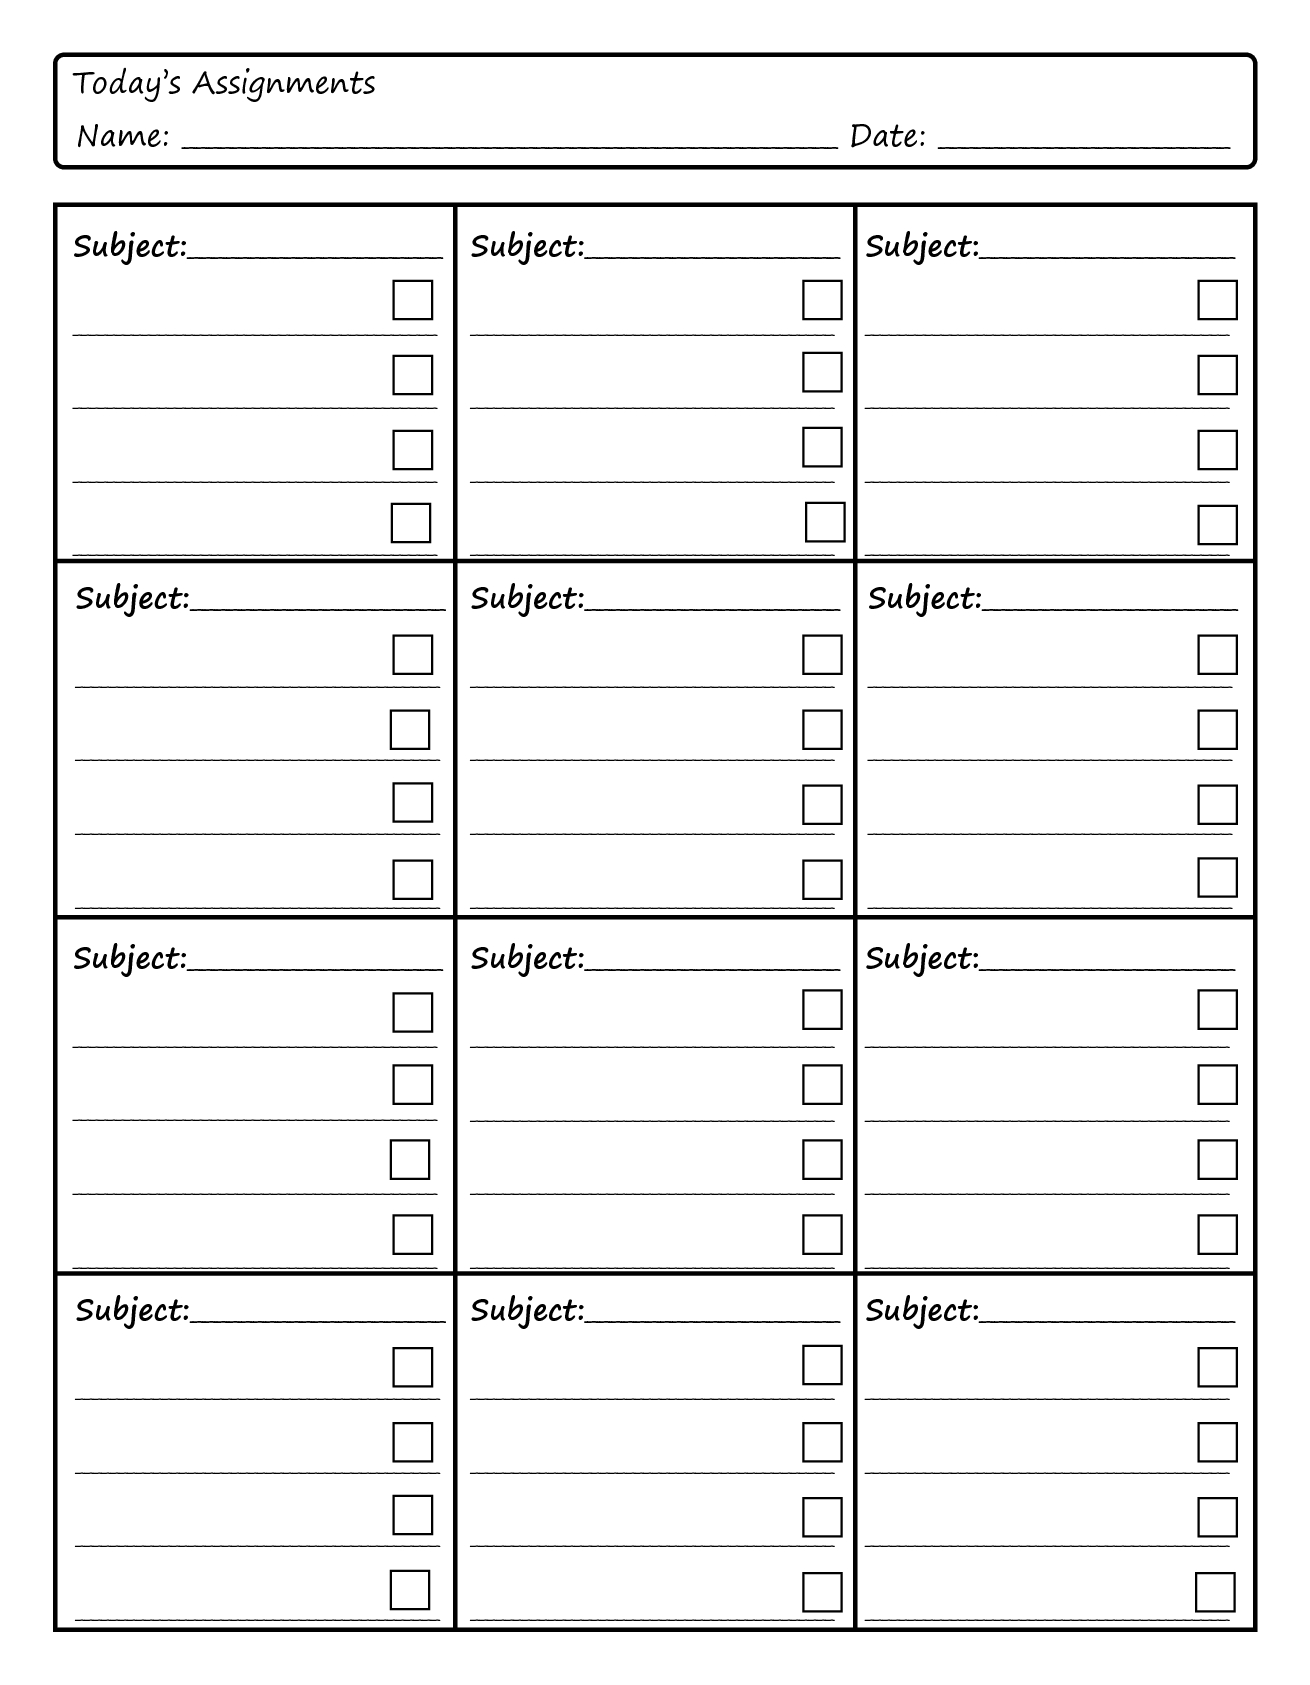 Daily Planners For Students | Daily Assignment Gridhsmommaof4 - Free Printable Daily Assignment Sheets